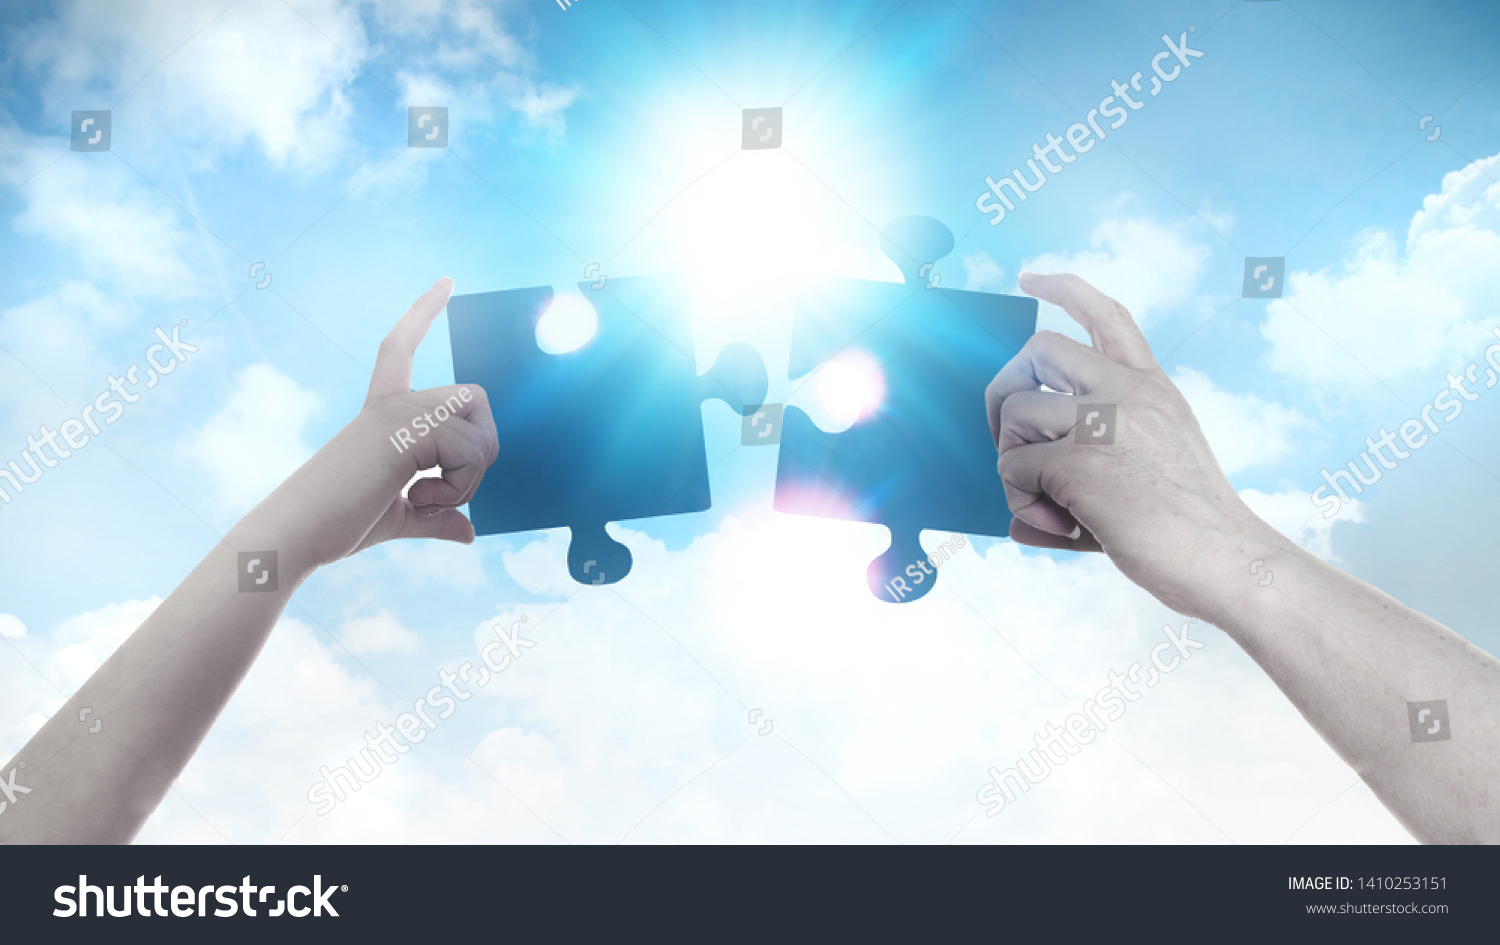 Two hands holding a puzzle pieces agains of blue sky background and sun. Business, support, finding the right decision concept.  #1410253151